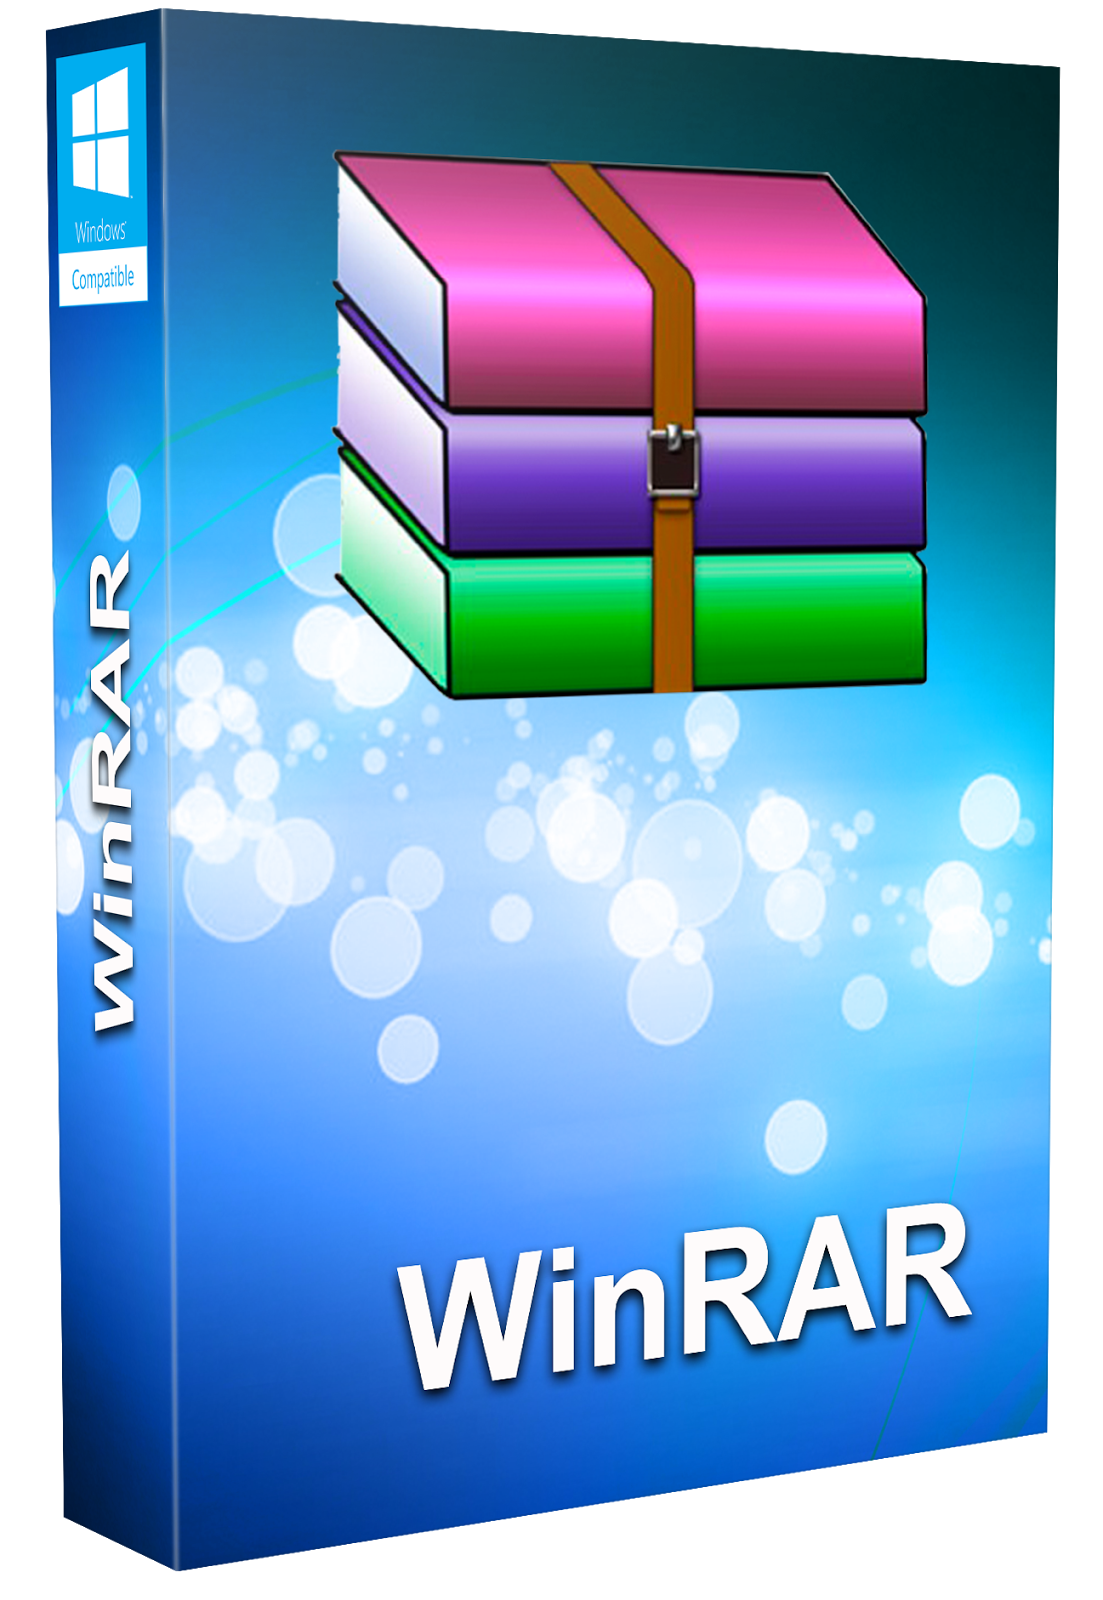 Winrar full version free download with crack